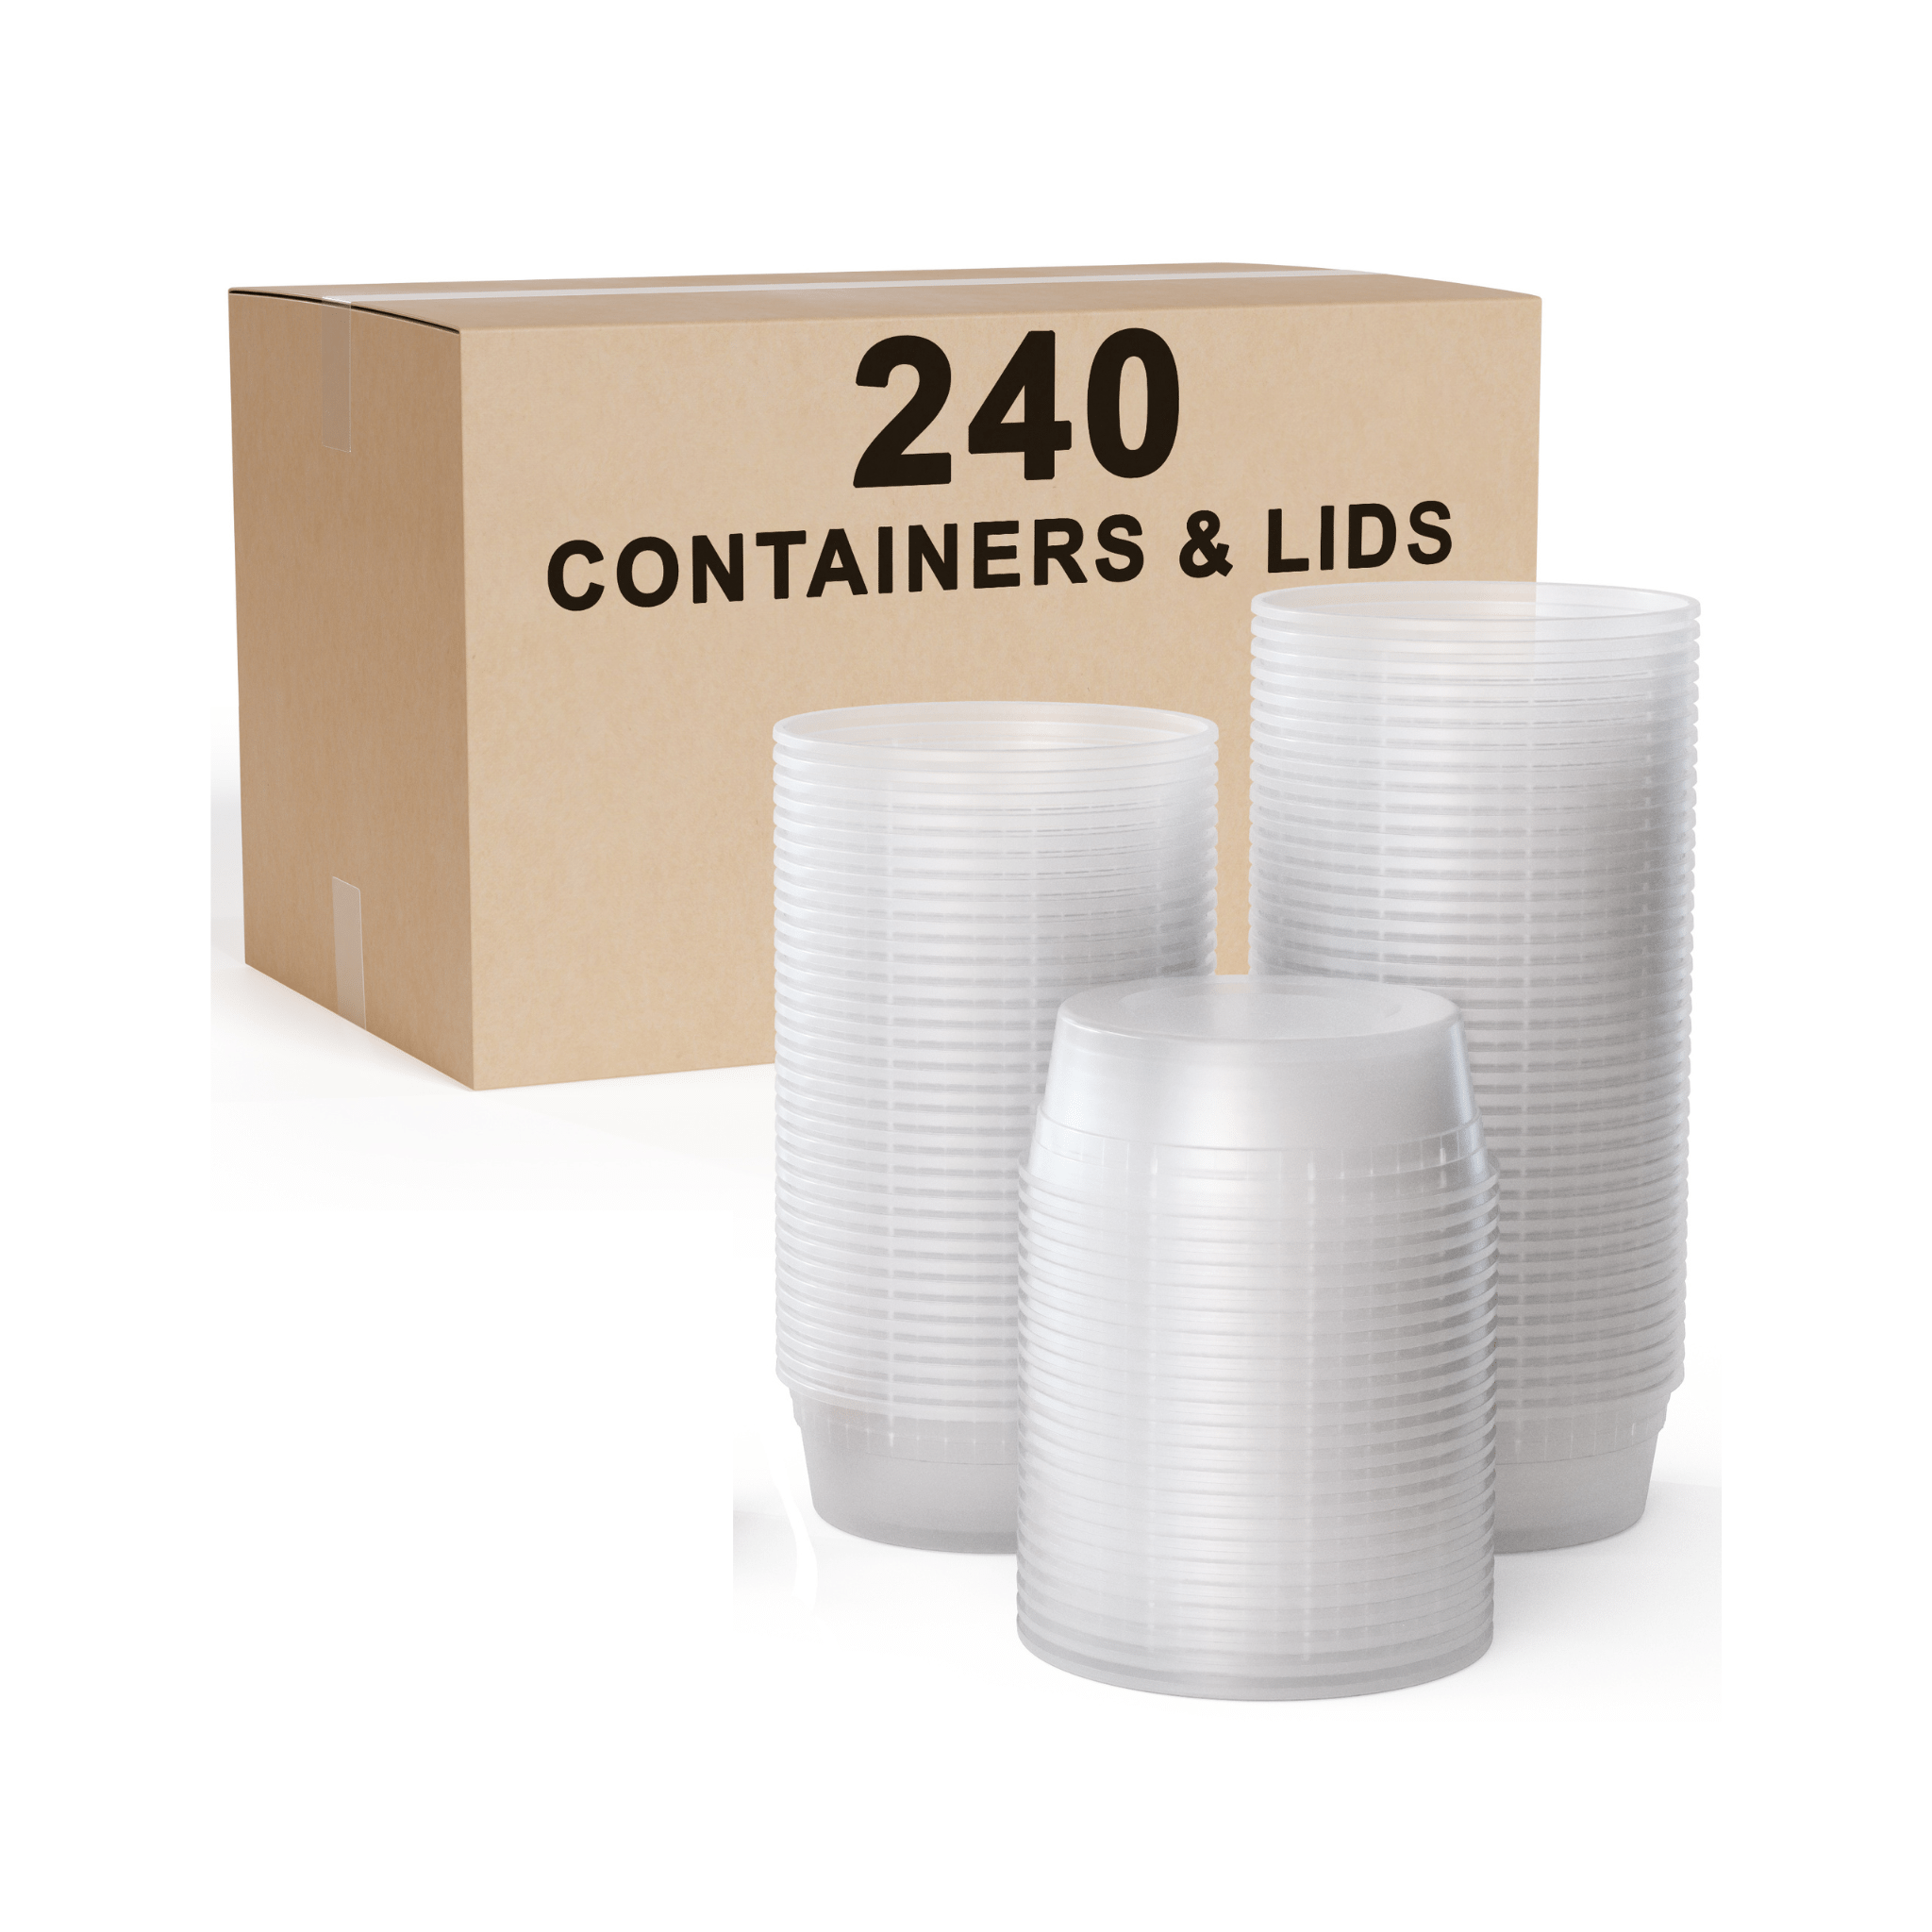 8 Oz. Deli Containers with Lids | 240 Pack